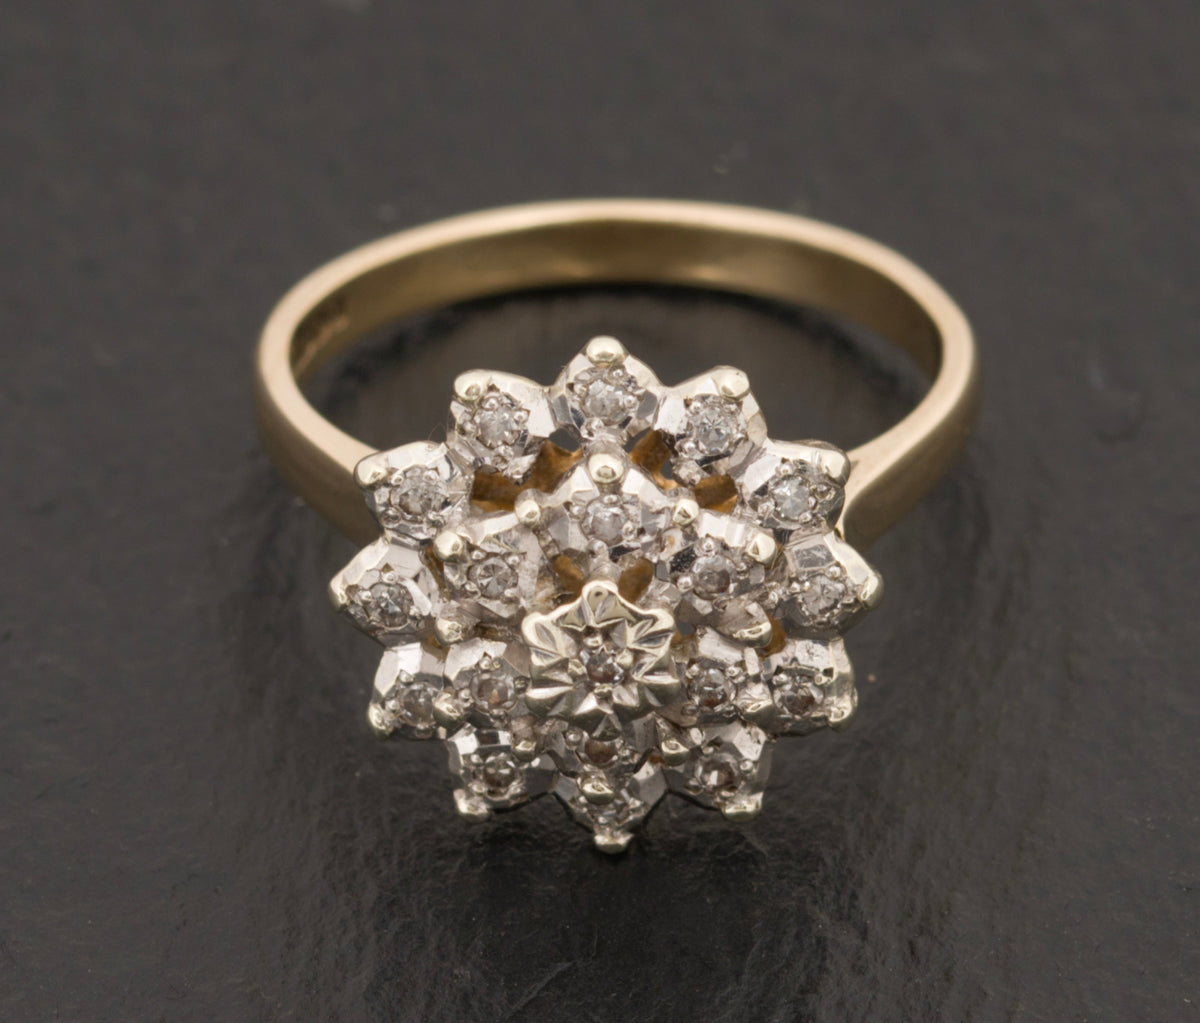 Vintage 9ct Gold & 3 Tiered Diamond Cluster Ring Hallmarked 1983 (A1528)